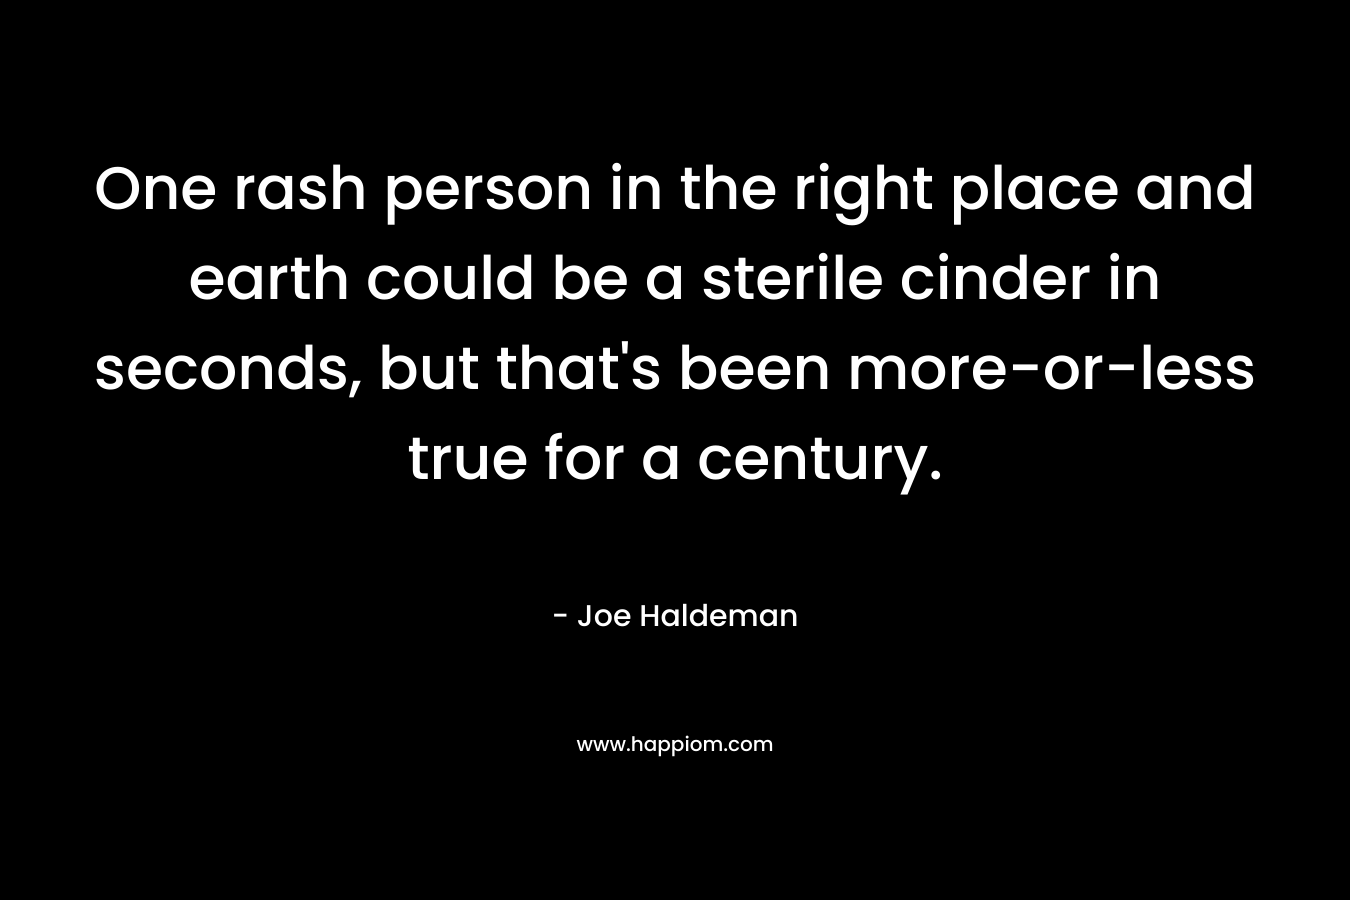 One rash person in the right place and earth could be a sterile cinder in seconds, but that’s been more-or-less true for a century. – Joe Haldeman